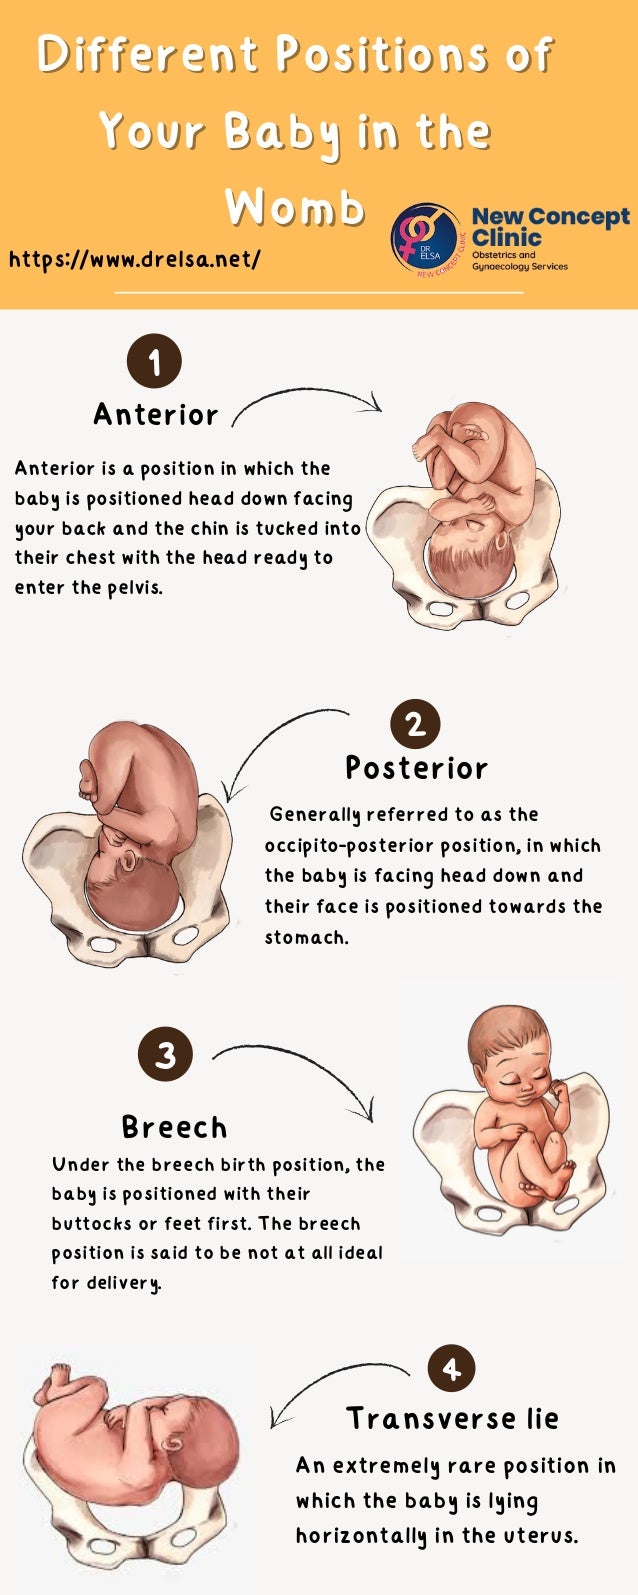 Different Positions of
Different Positions of
Your Baby in the
Your Baby in the
Womb
Womb




Anterior
1
3
2
4
Posterior
Breech
Transverse lie
Anterior is a position in which the
baby is positioned head down facing
your back and the chin is tucked into
their chest with the head ready to
enter the pelvis.
Generally referred to as the
occipito-posterior position, in which
the baby is facing head down and
their face is positioned towards the
stomach.
Under the breech birth position, the
baby is positioned with their
buttocks or feet first. The breech
position is said to be not at all ideal
for delivery.
An extremely rare position in
which the baby is lying
horizontally in the uterus.
https://www.drelsa.net/
 